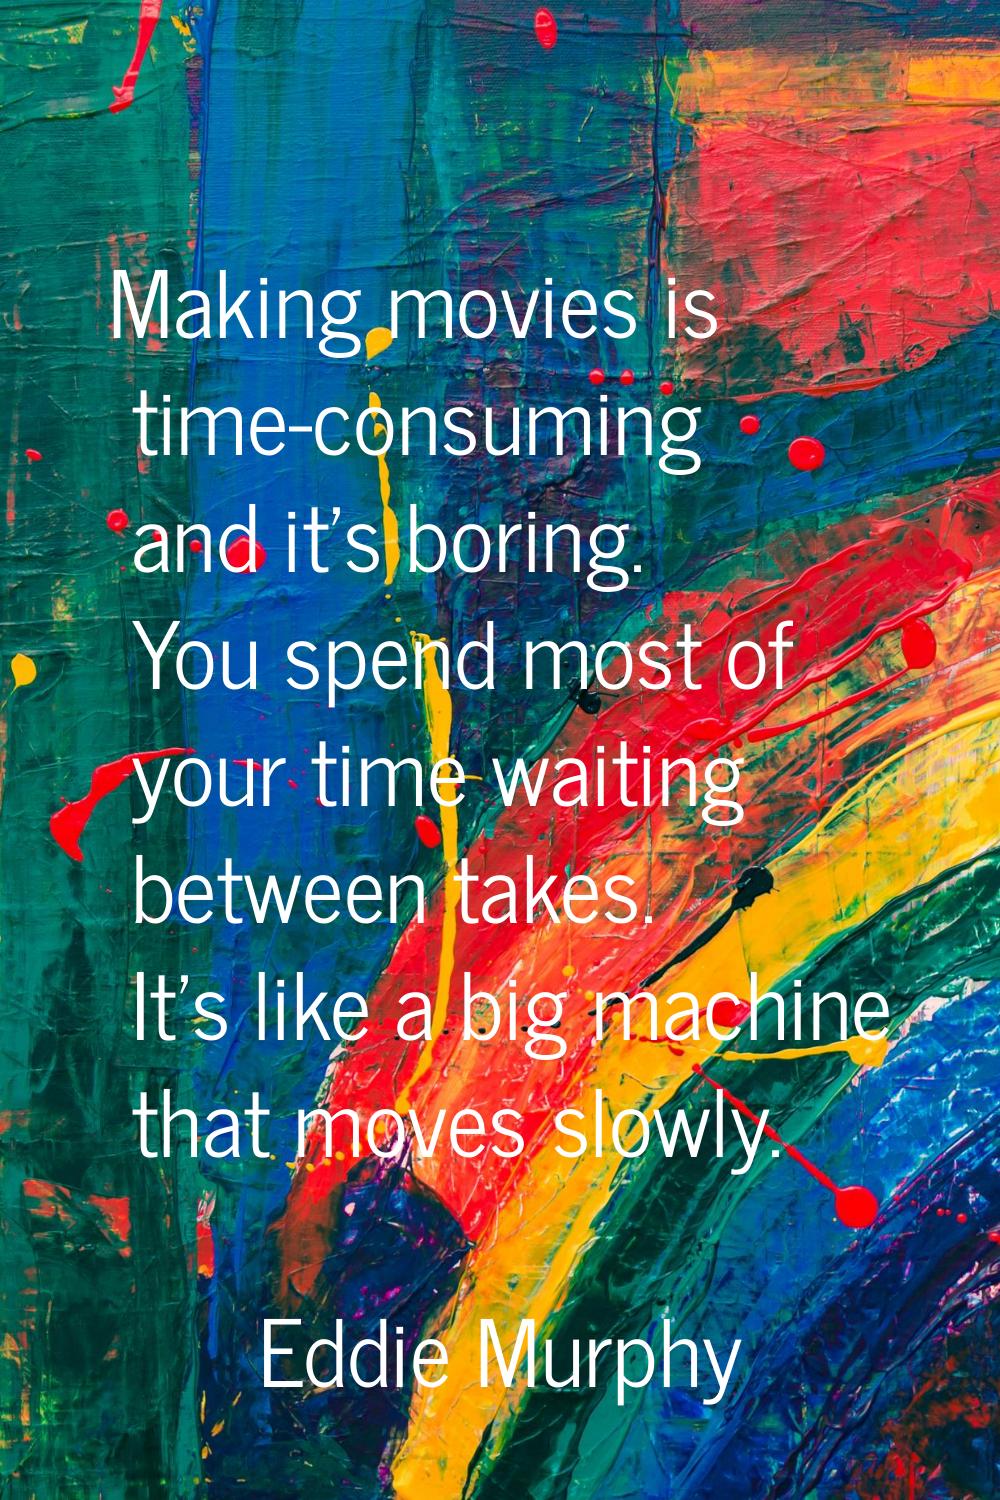 Making movies is time-consuming and it's boring. You spend most of your time waiting between takes.